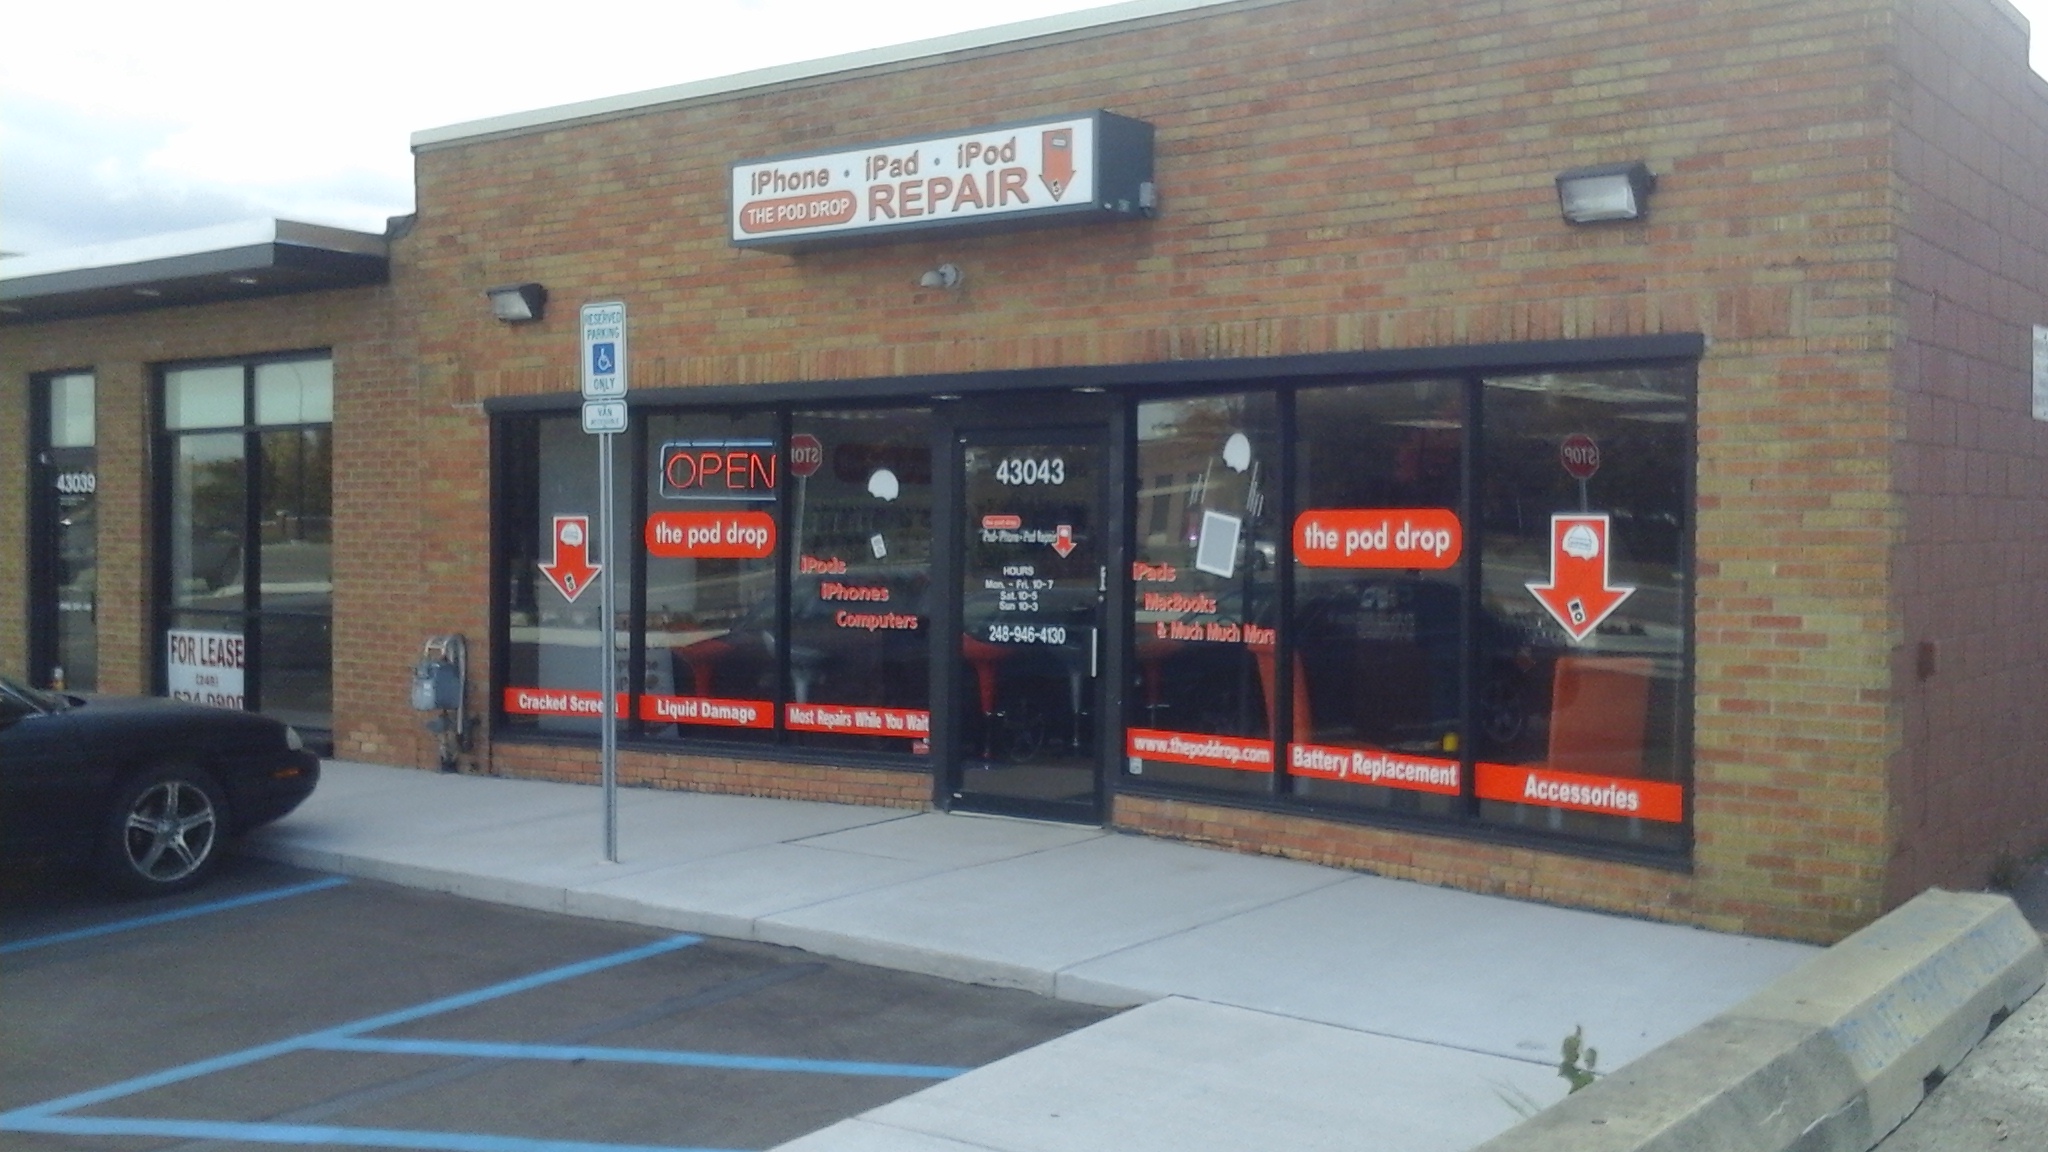 Visit our local cell phone, tablet and mobile device repair shop today!